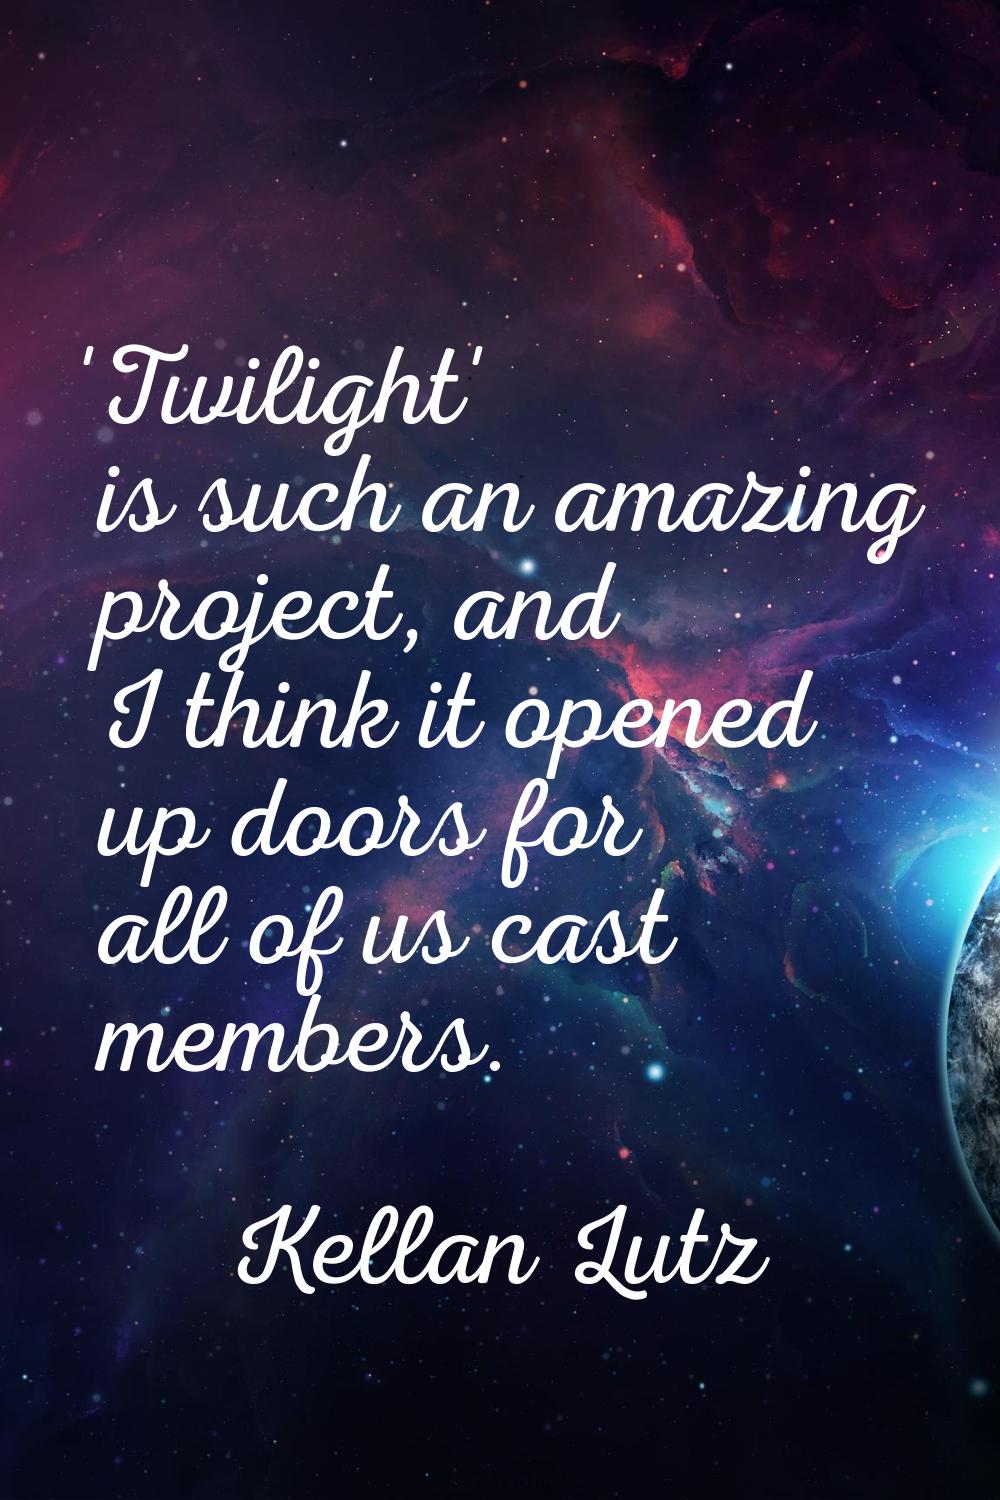 'Twilight' is such an amazing project, and I think it opened up doors for all of us cast members.